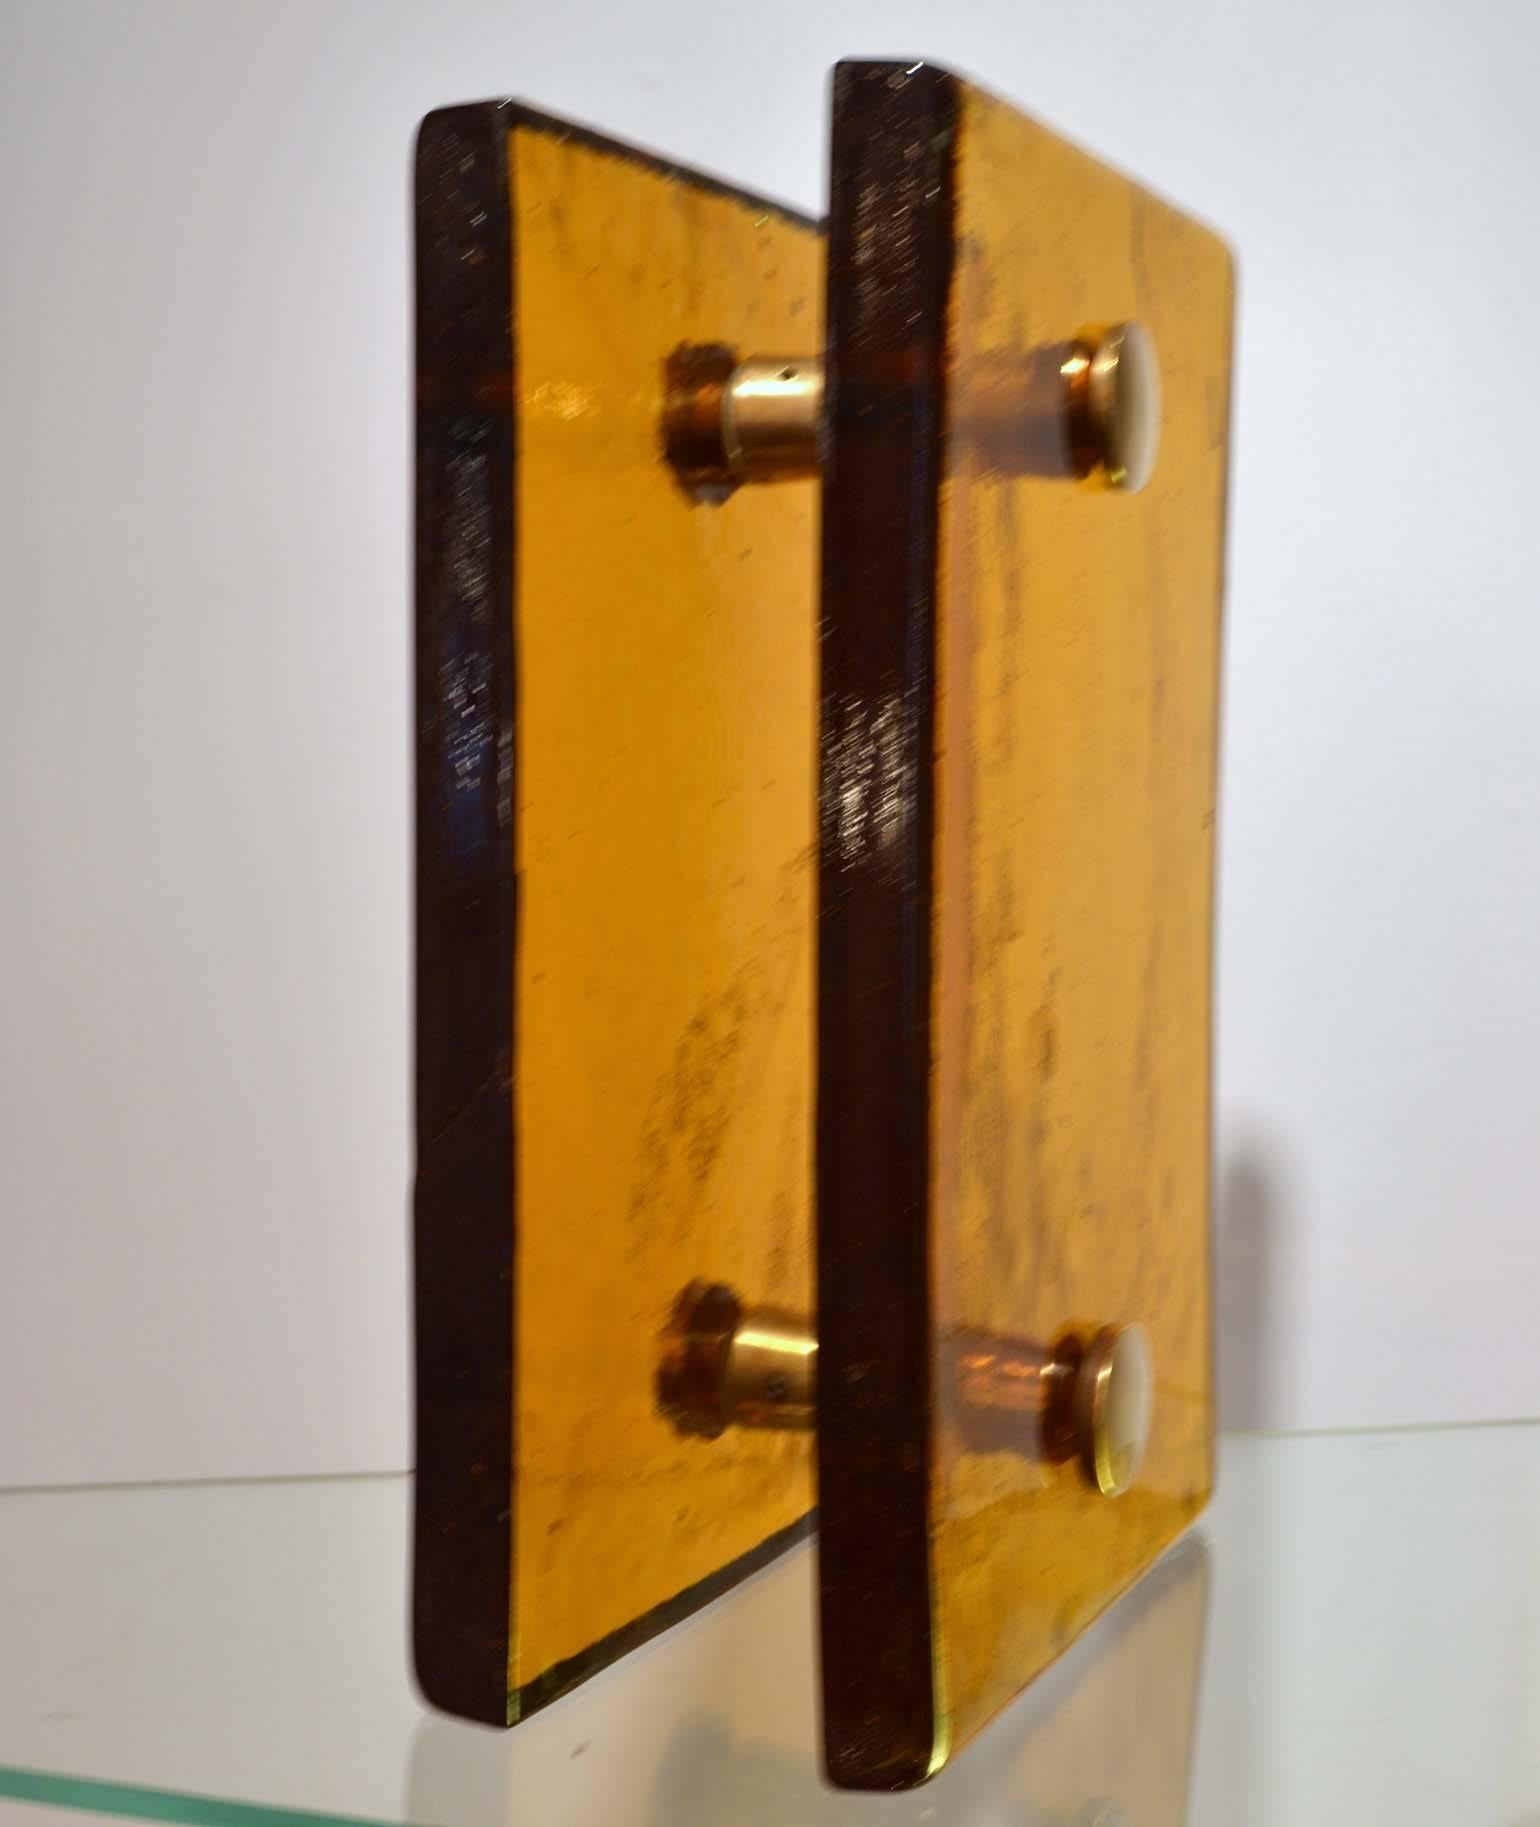 Amber glass double door handle with brass fittings for a glass door. France 1960-70's
They can be adapted for a wooden door by extending the external thread.
The last picture shows an orange pair that is available.
